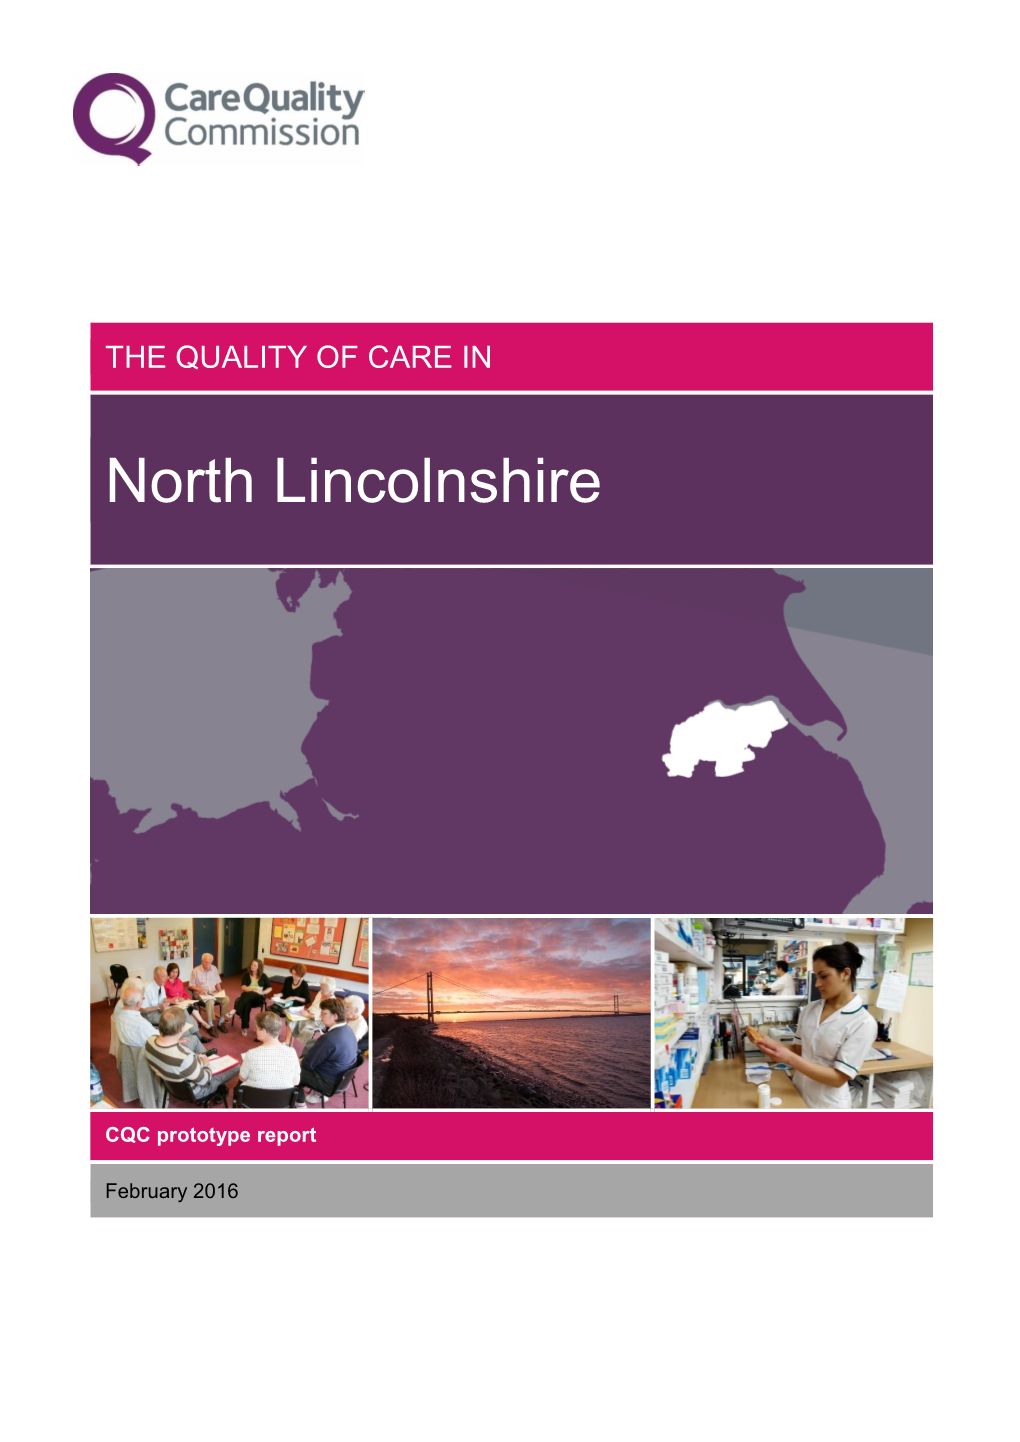 The Quality of Care in North Lincolnshire the Quality of Care in Salford Prototype Report (Greater Manchester) (February 2016) Prototype Report (May 2016)